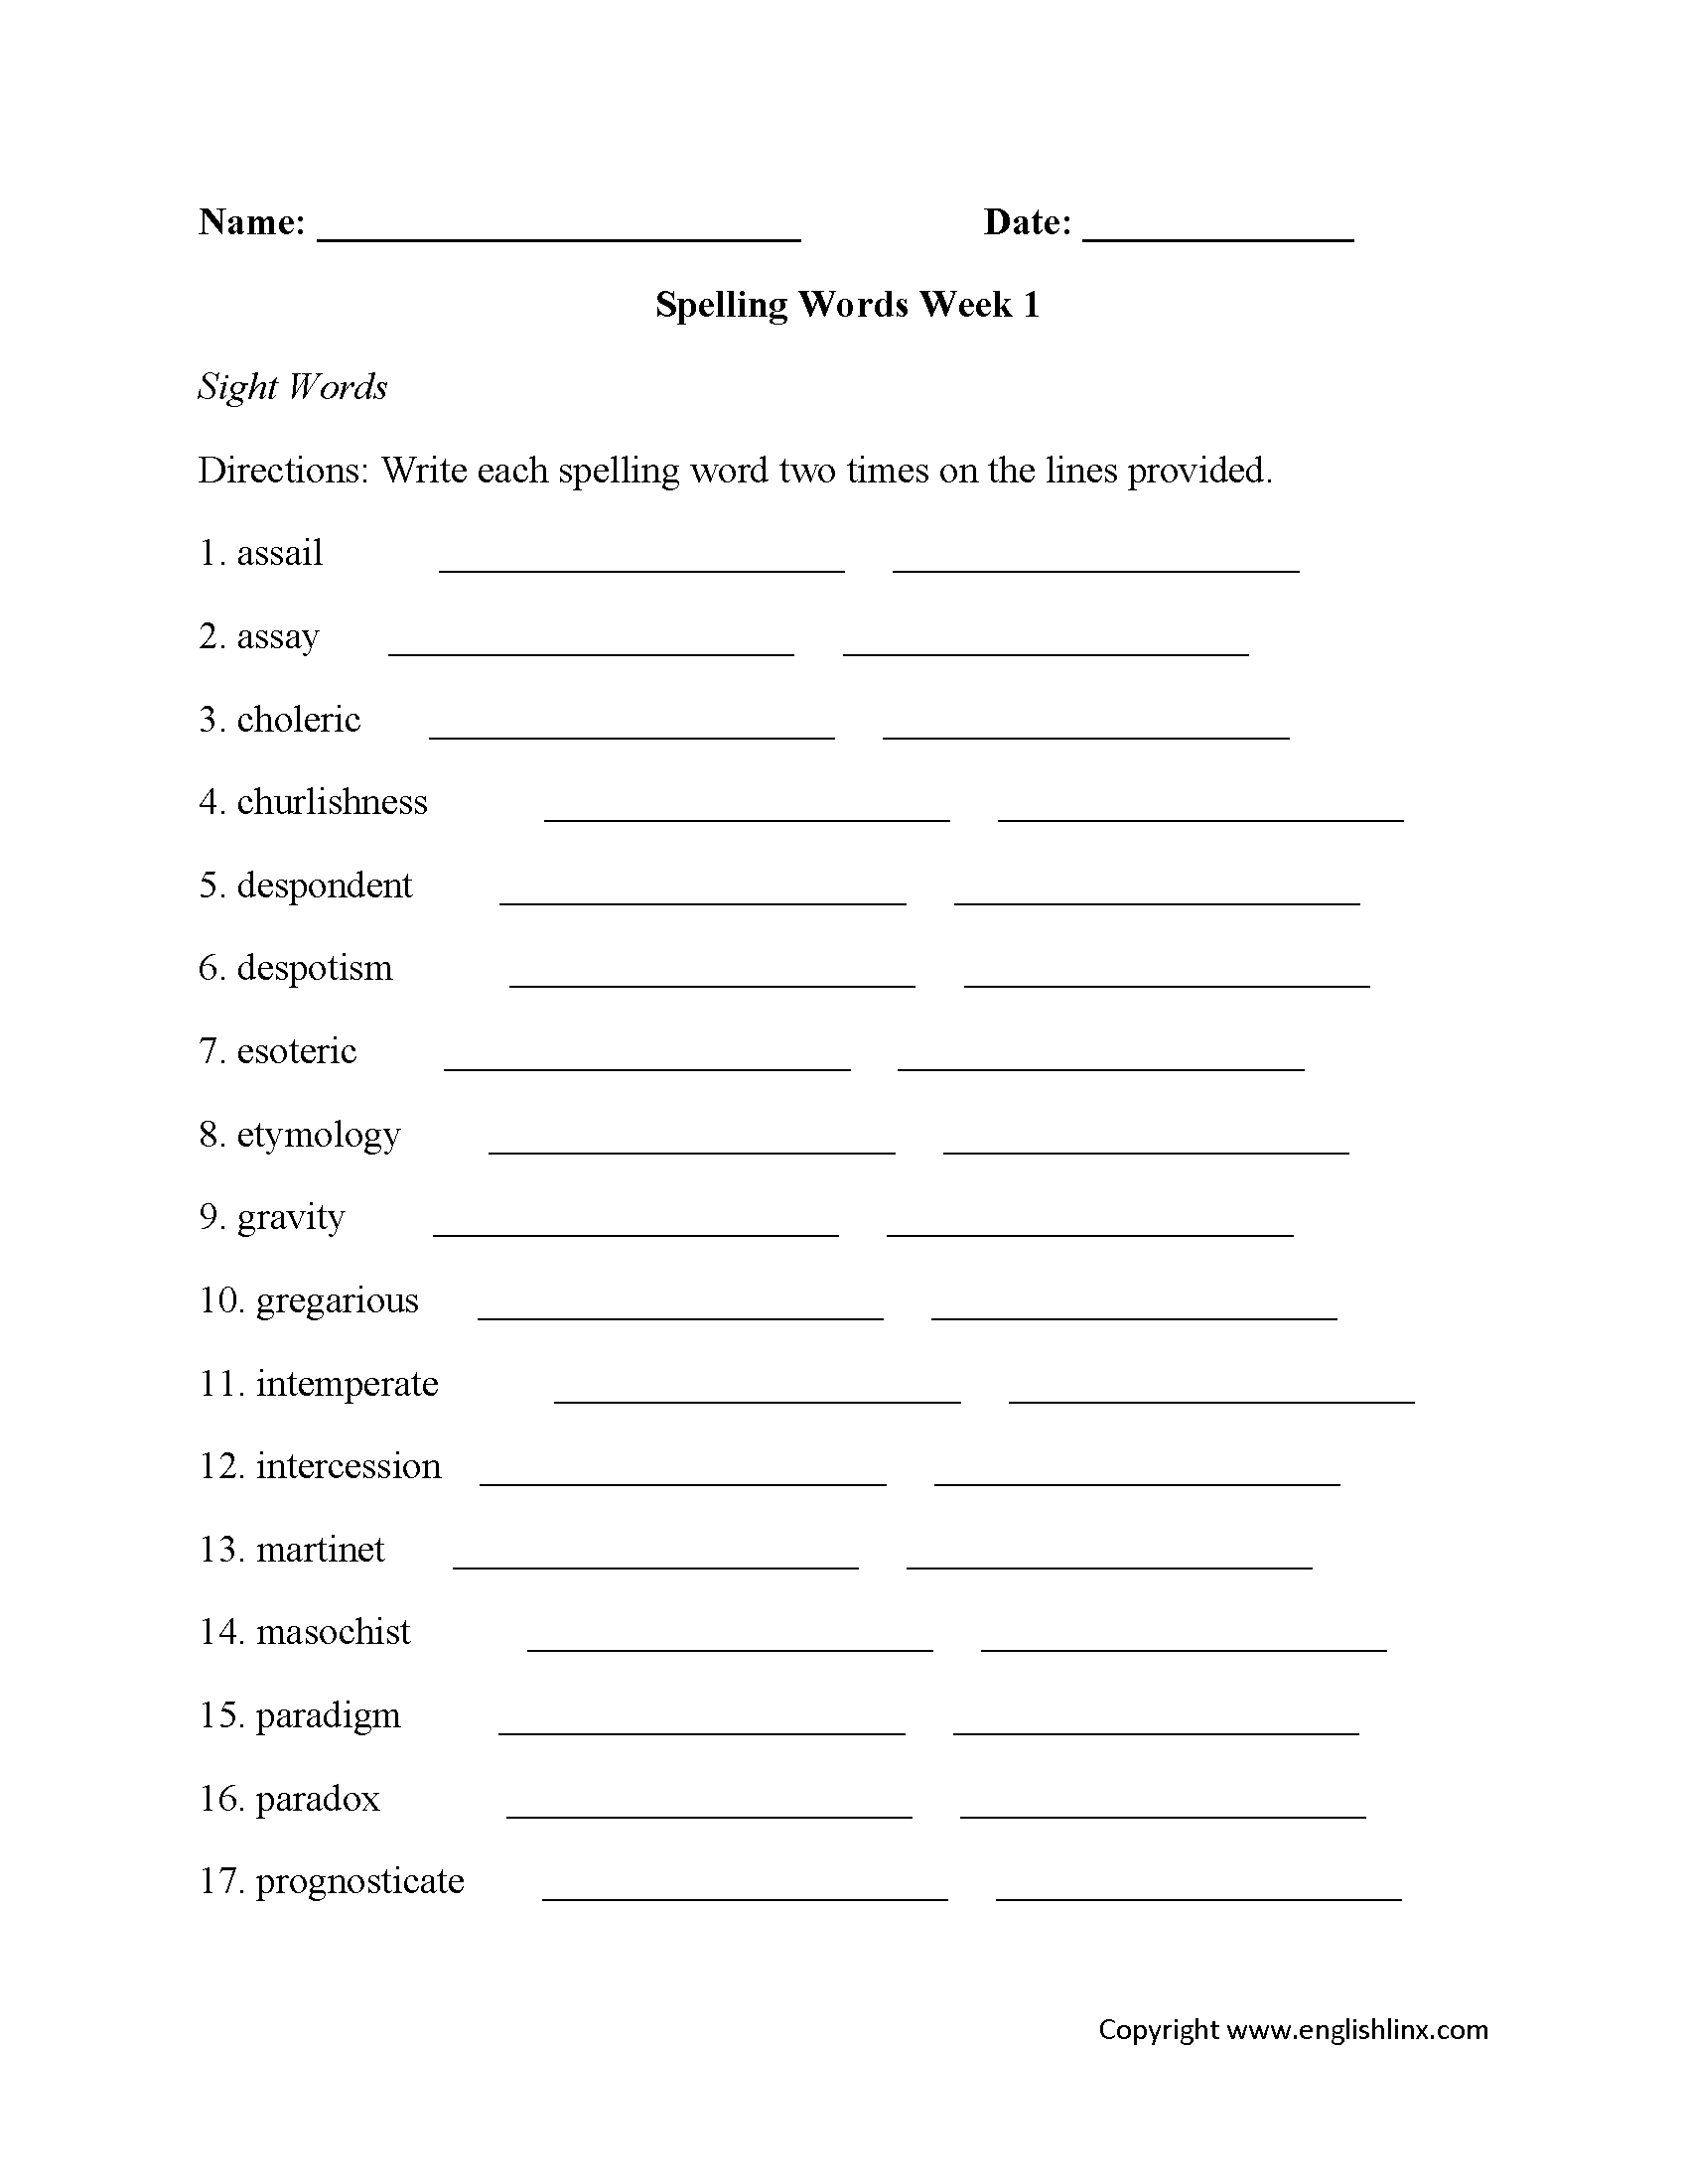 Free Printable Spelling Worksheets For Adults | Free Printable